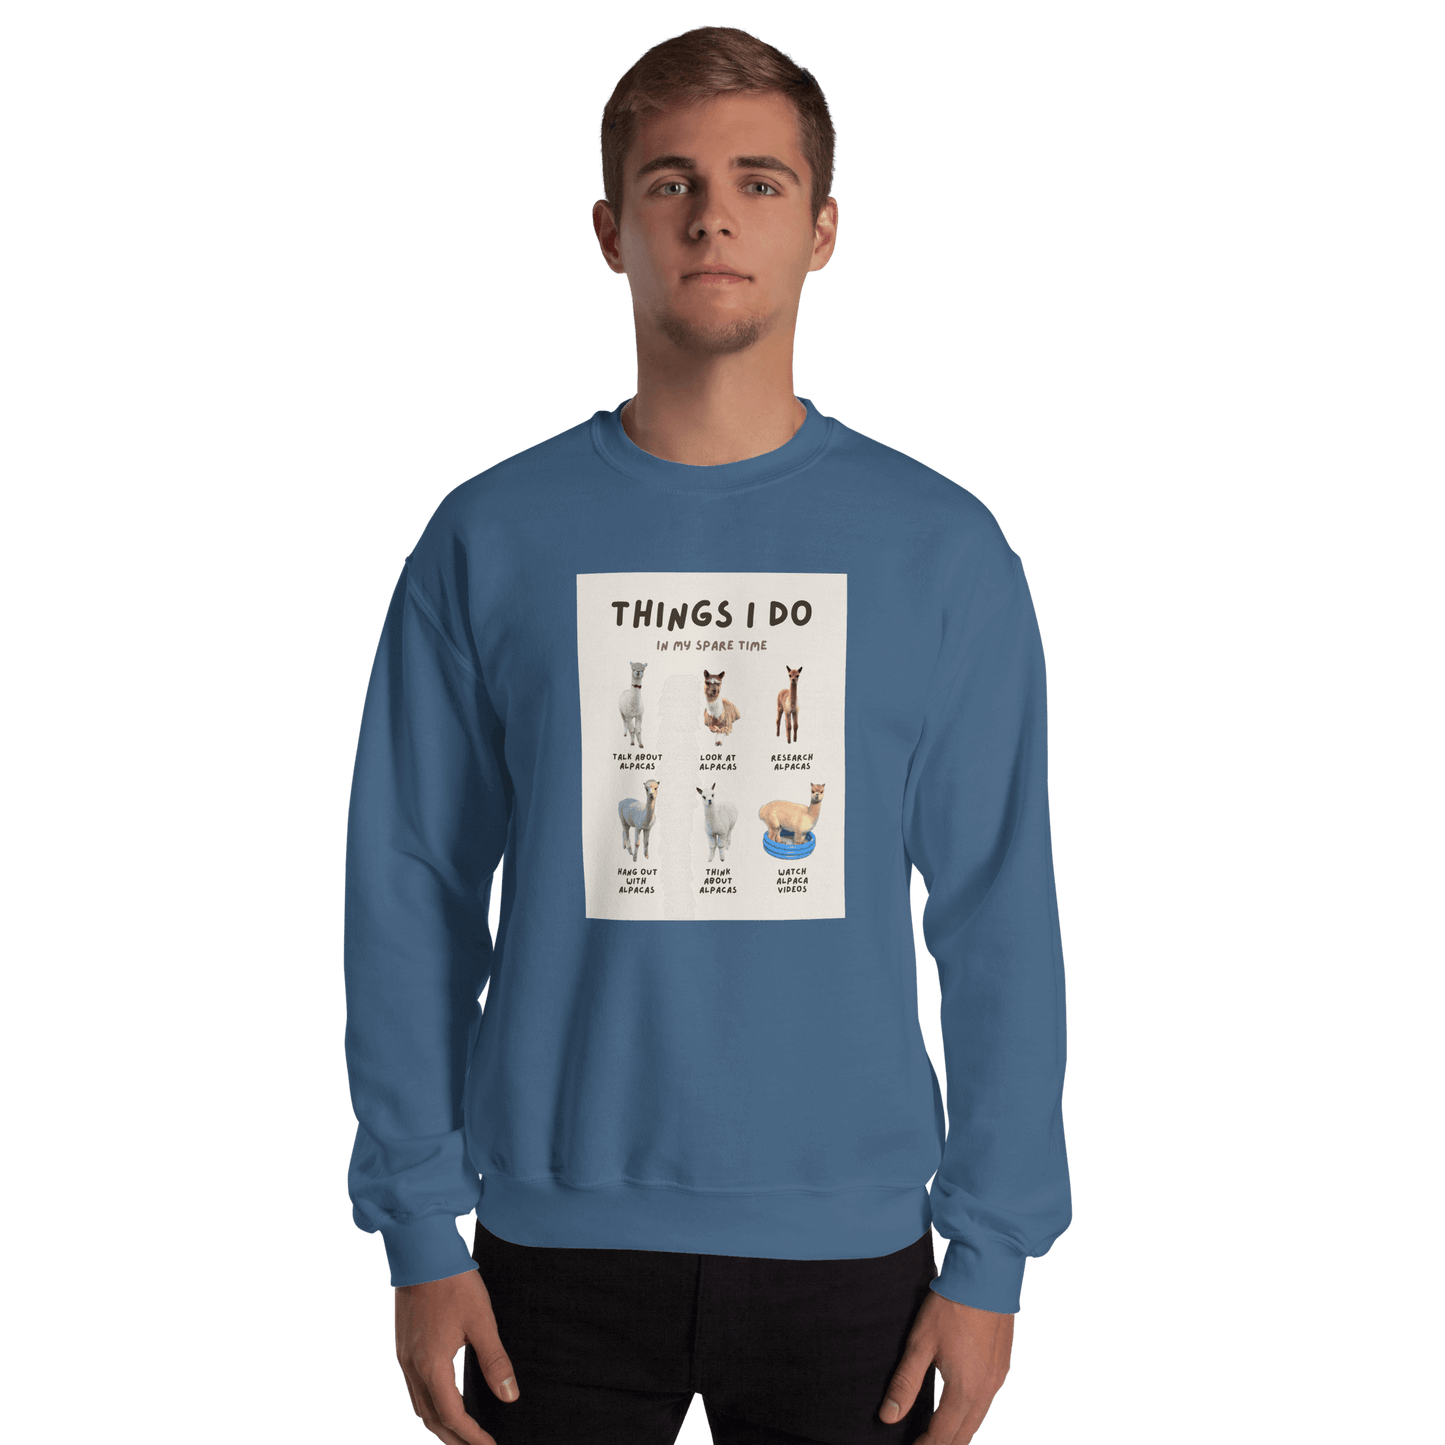 Alpaca Meme Sweater "Things I Do In My Spare Time" | Motif with funny alpaca photos | Ideal for humor-loving alpaca fans